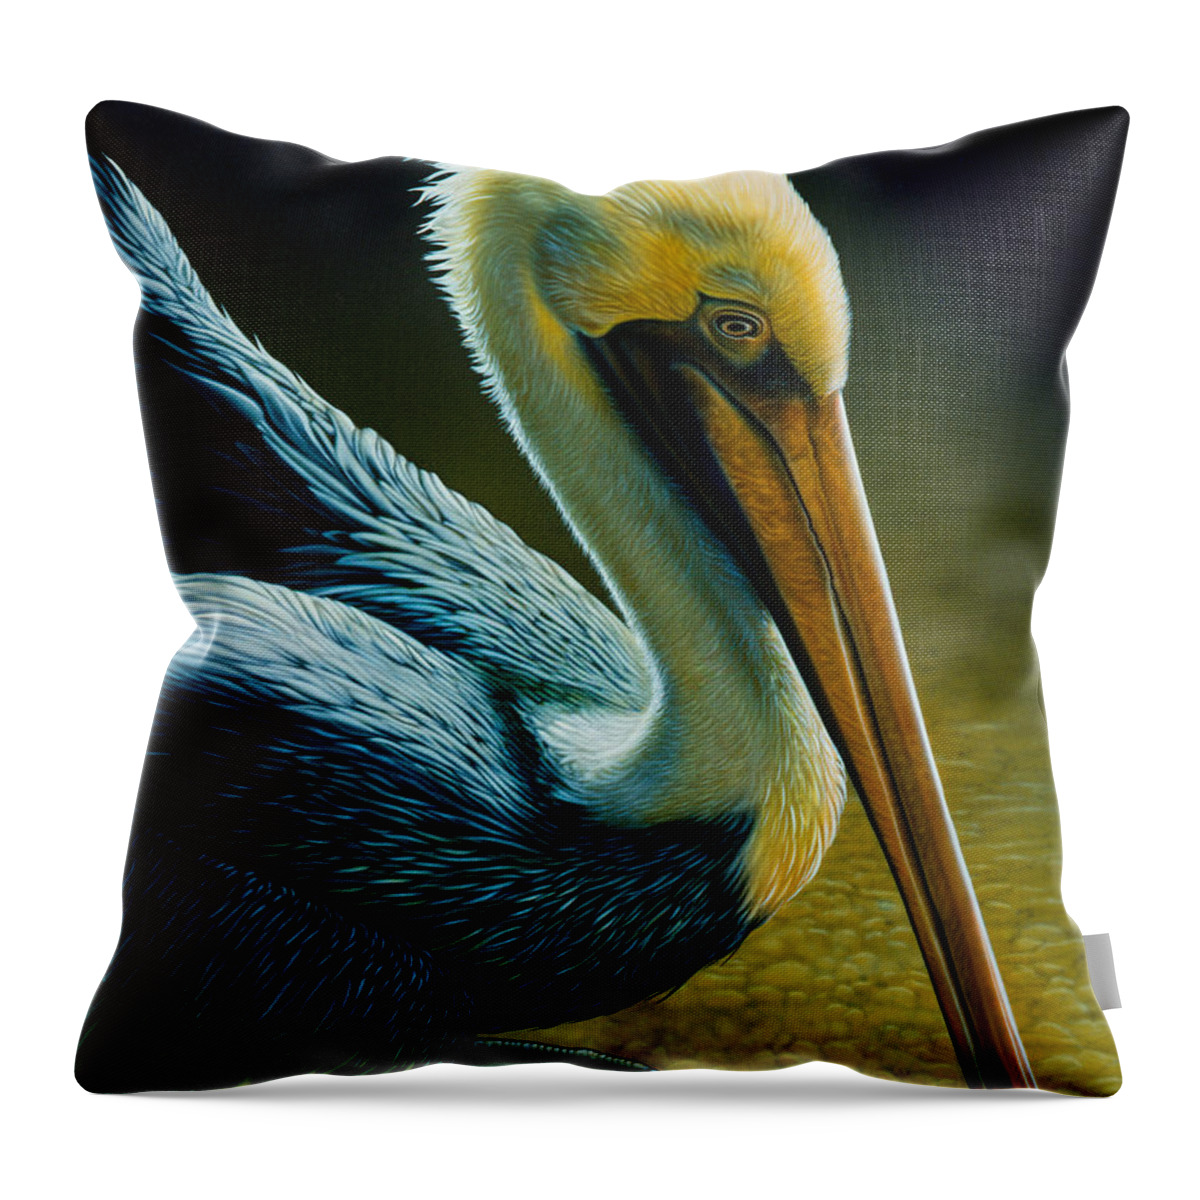 Larry Taugher Throw Pillow featuring the painting Pelican Detail by JQ Licensing